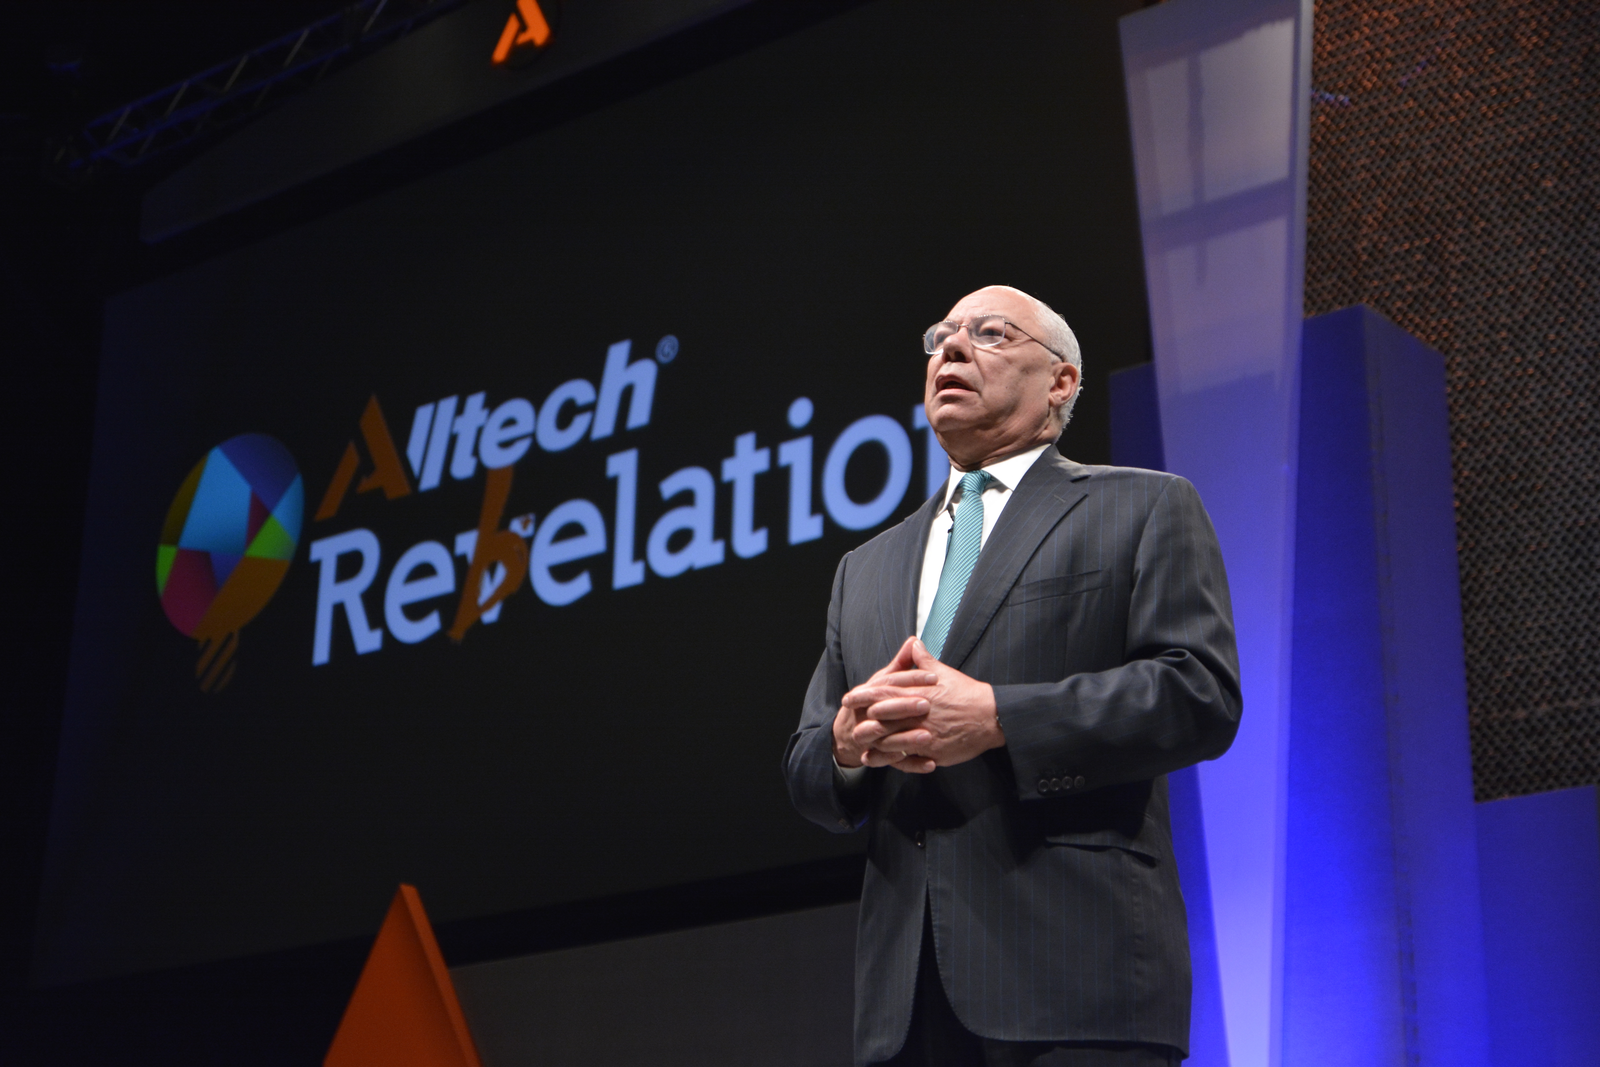 Alltech Medal of Excellence for Gen. Colin Powell